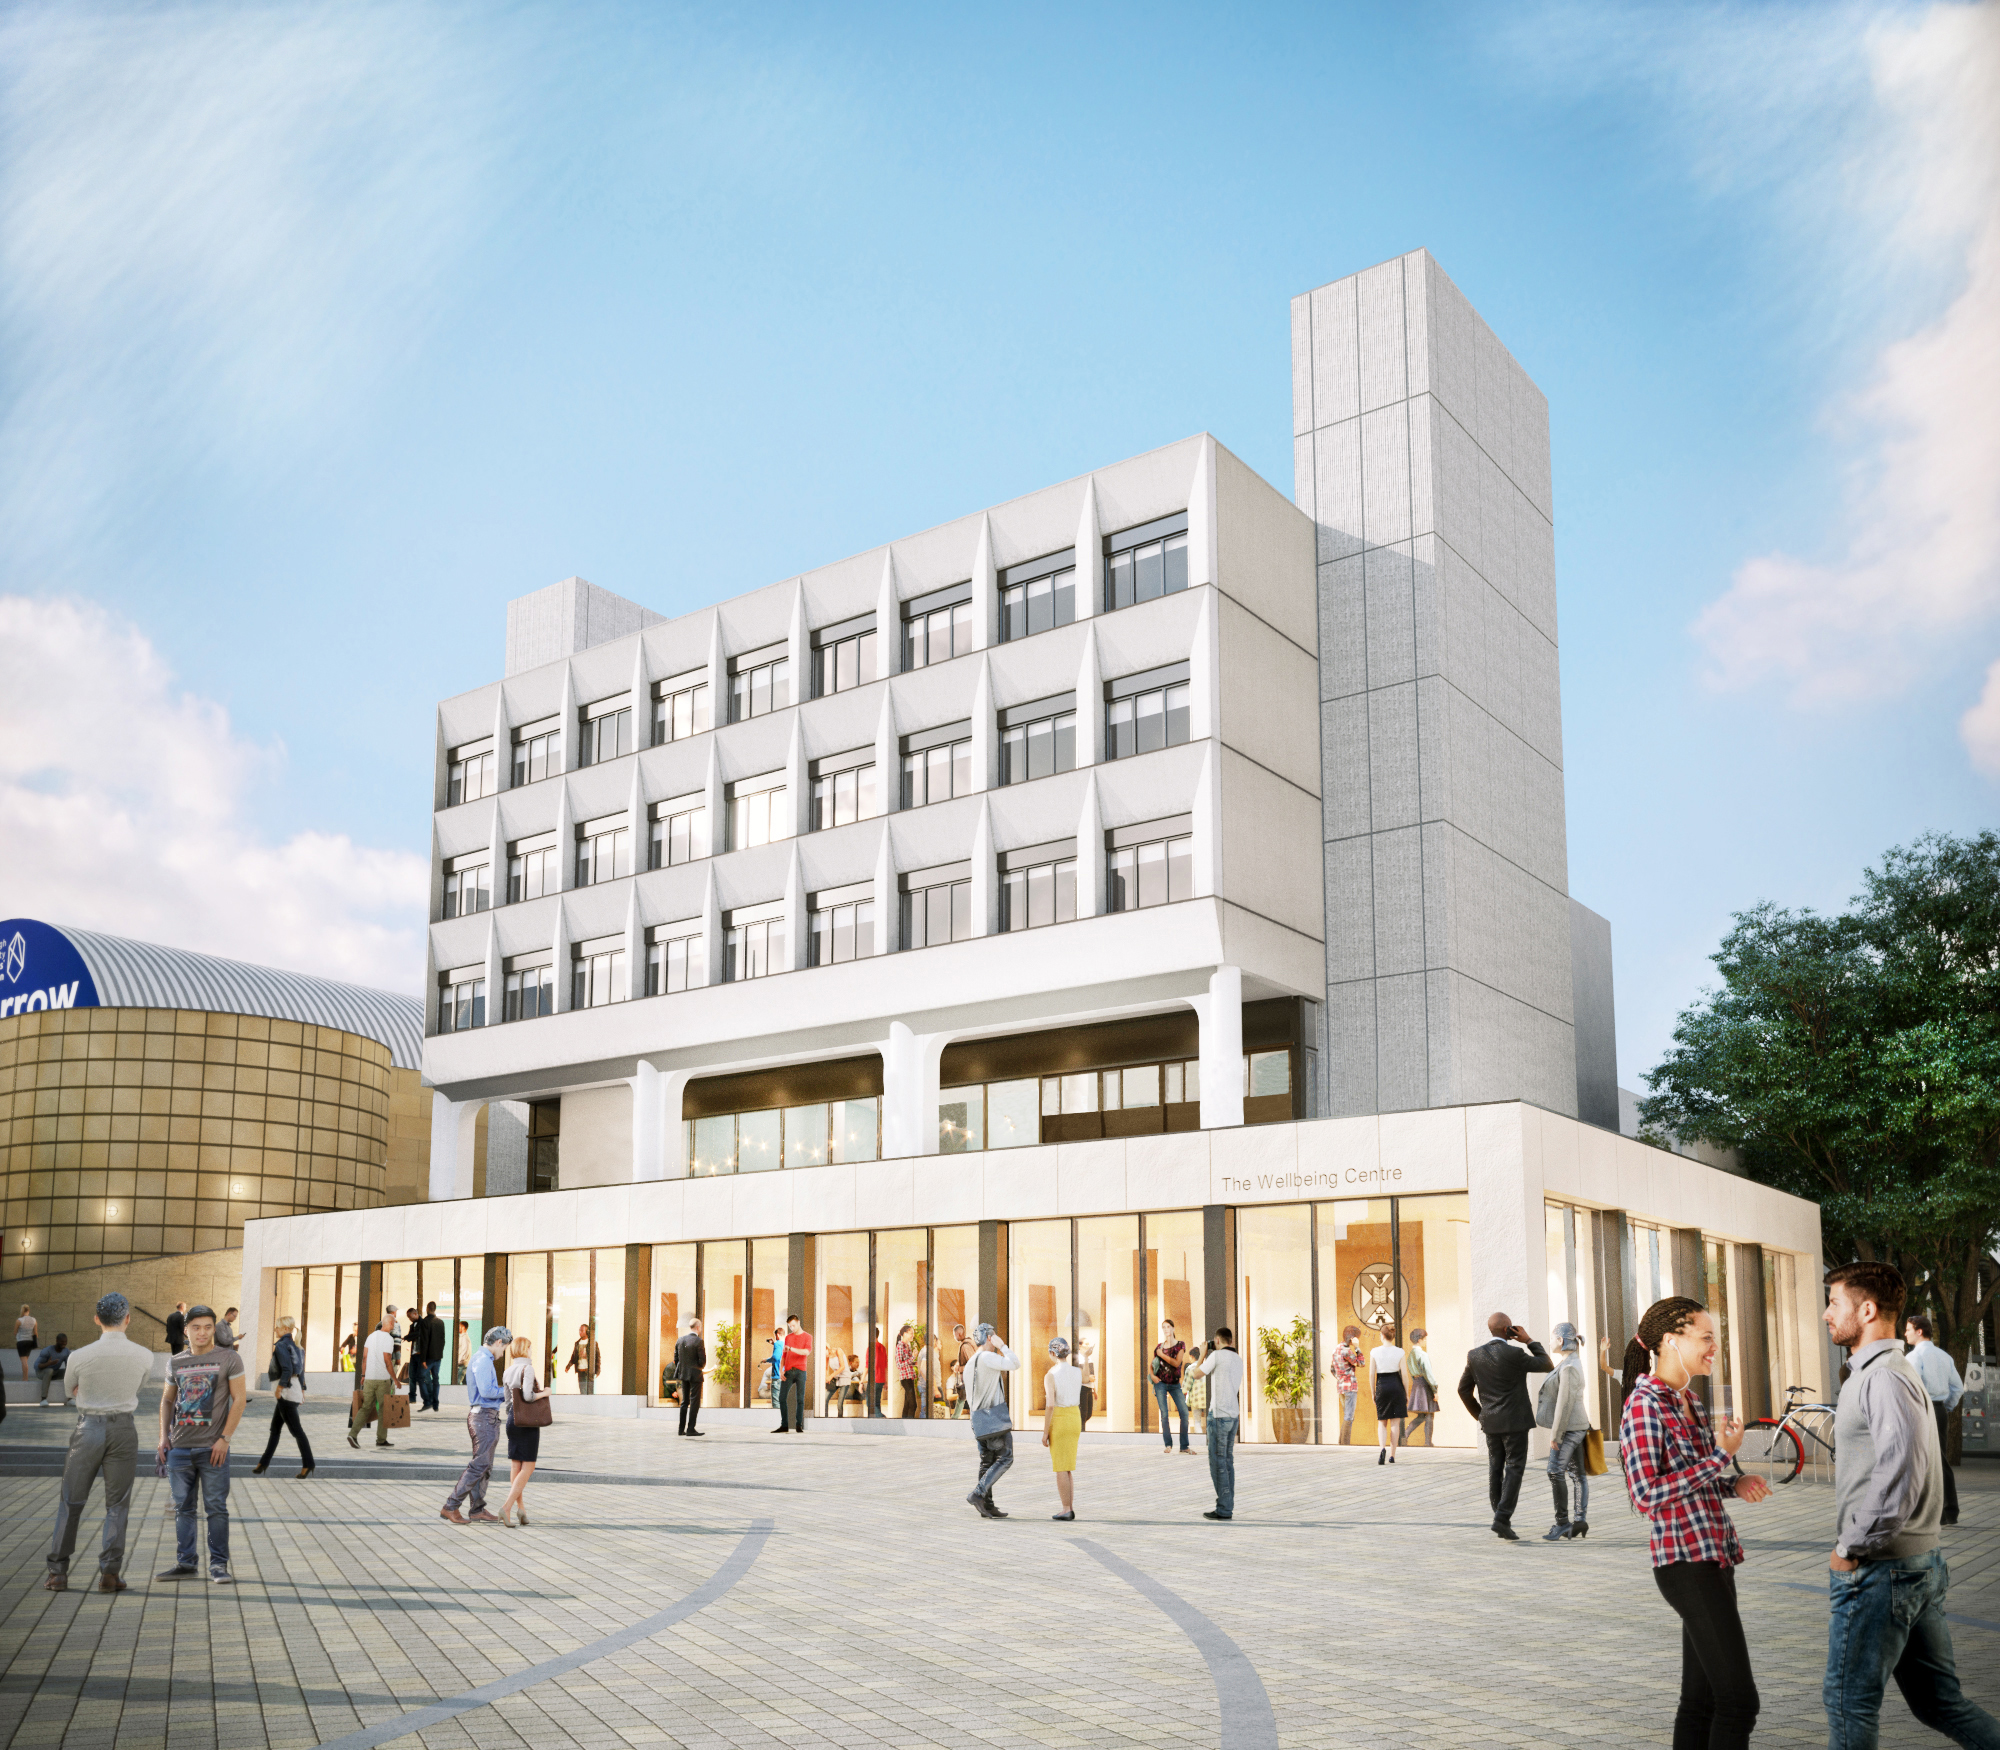 Work starts on University of Edinburgh’s new Health and Wellbeing Centre